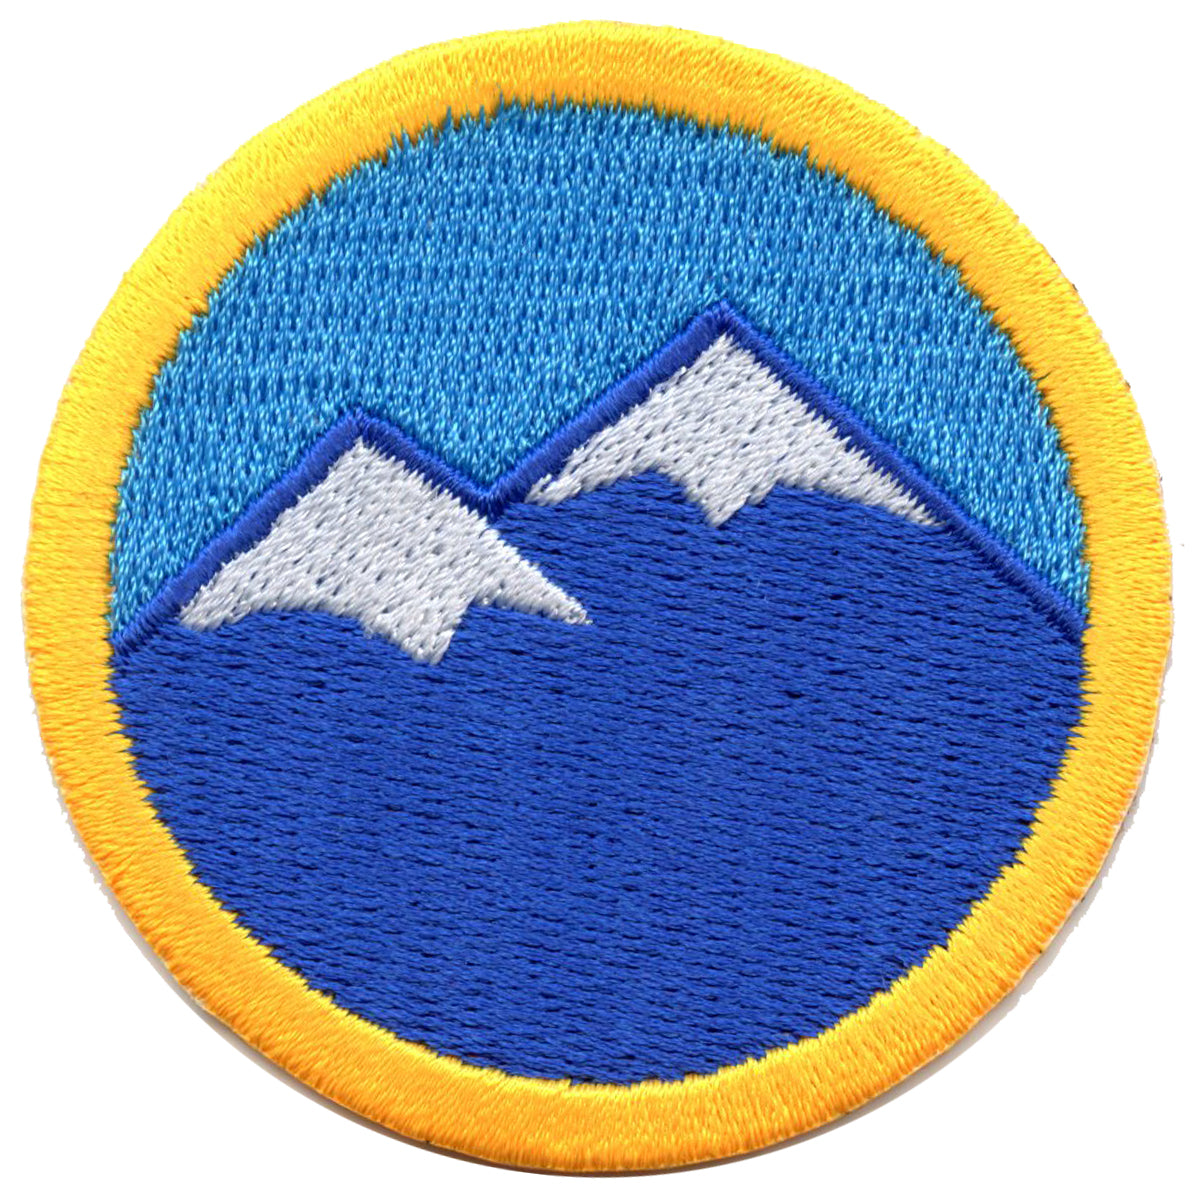 Mountain Patch Nature Adventure Embroidery Patches For Clothing Iron On  Patches On Clothes Wilderness Stripe Patch Camping Badge